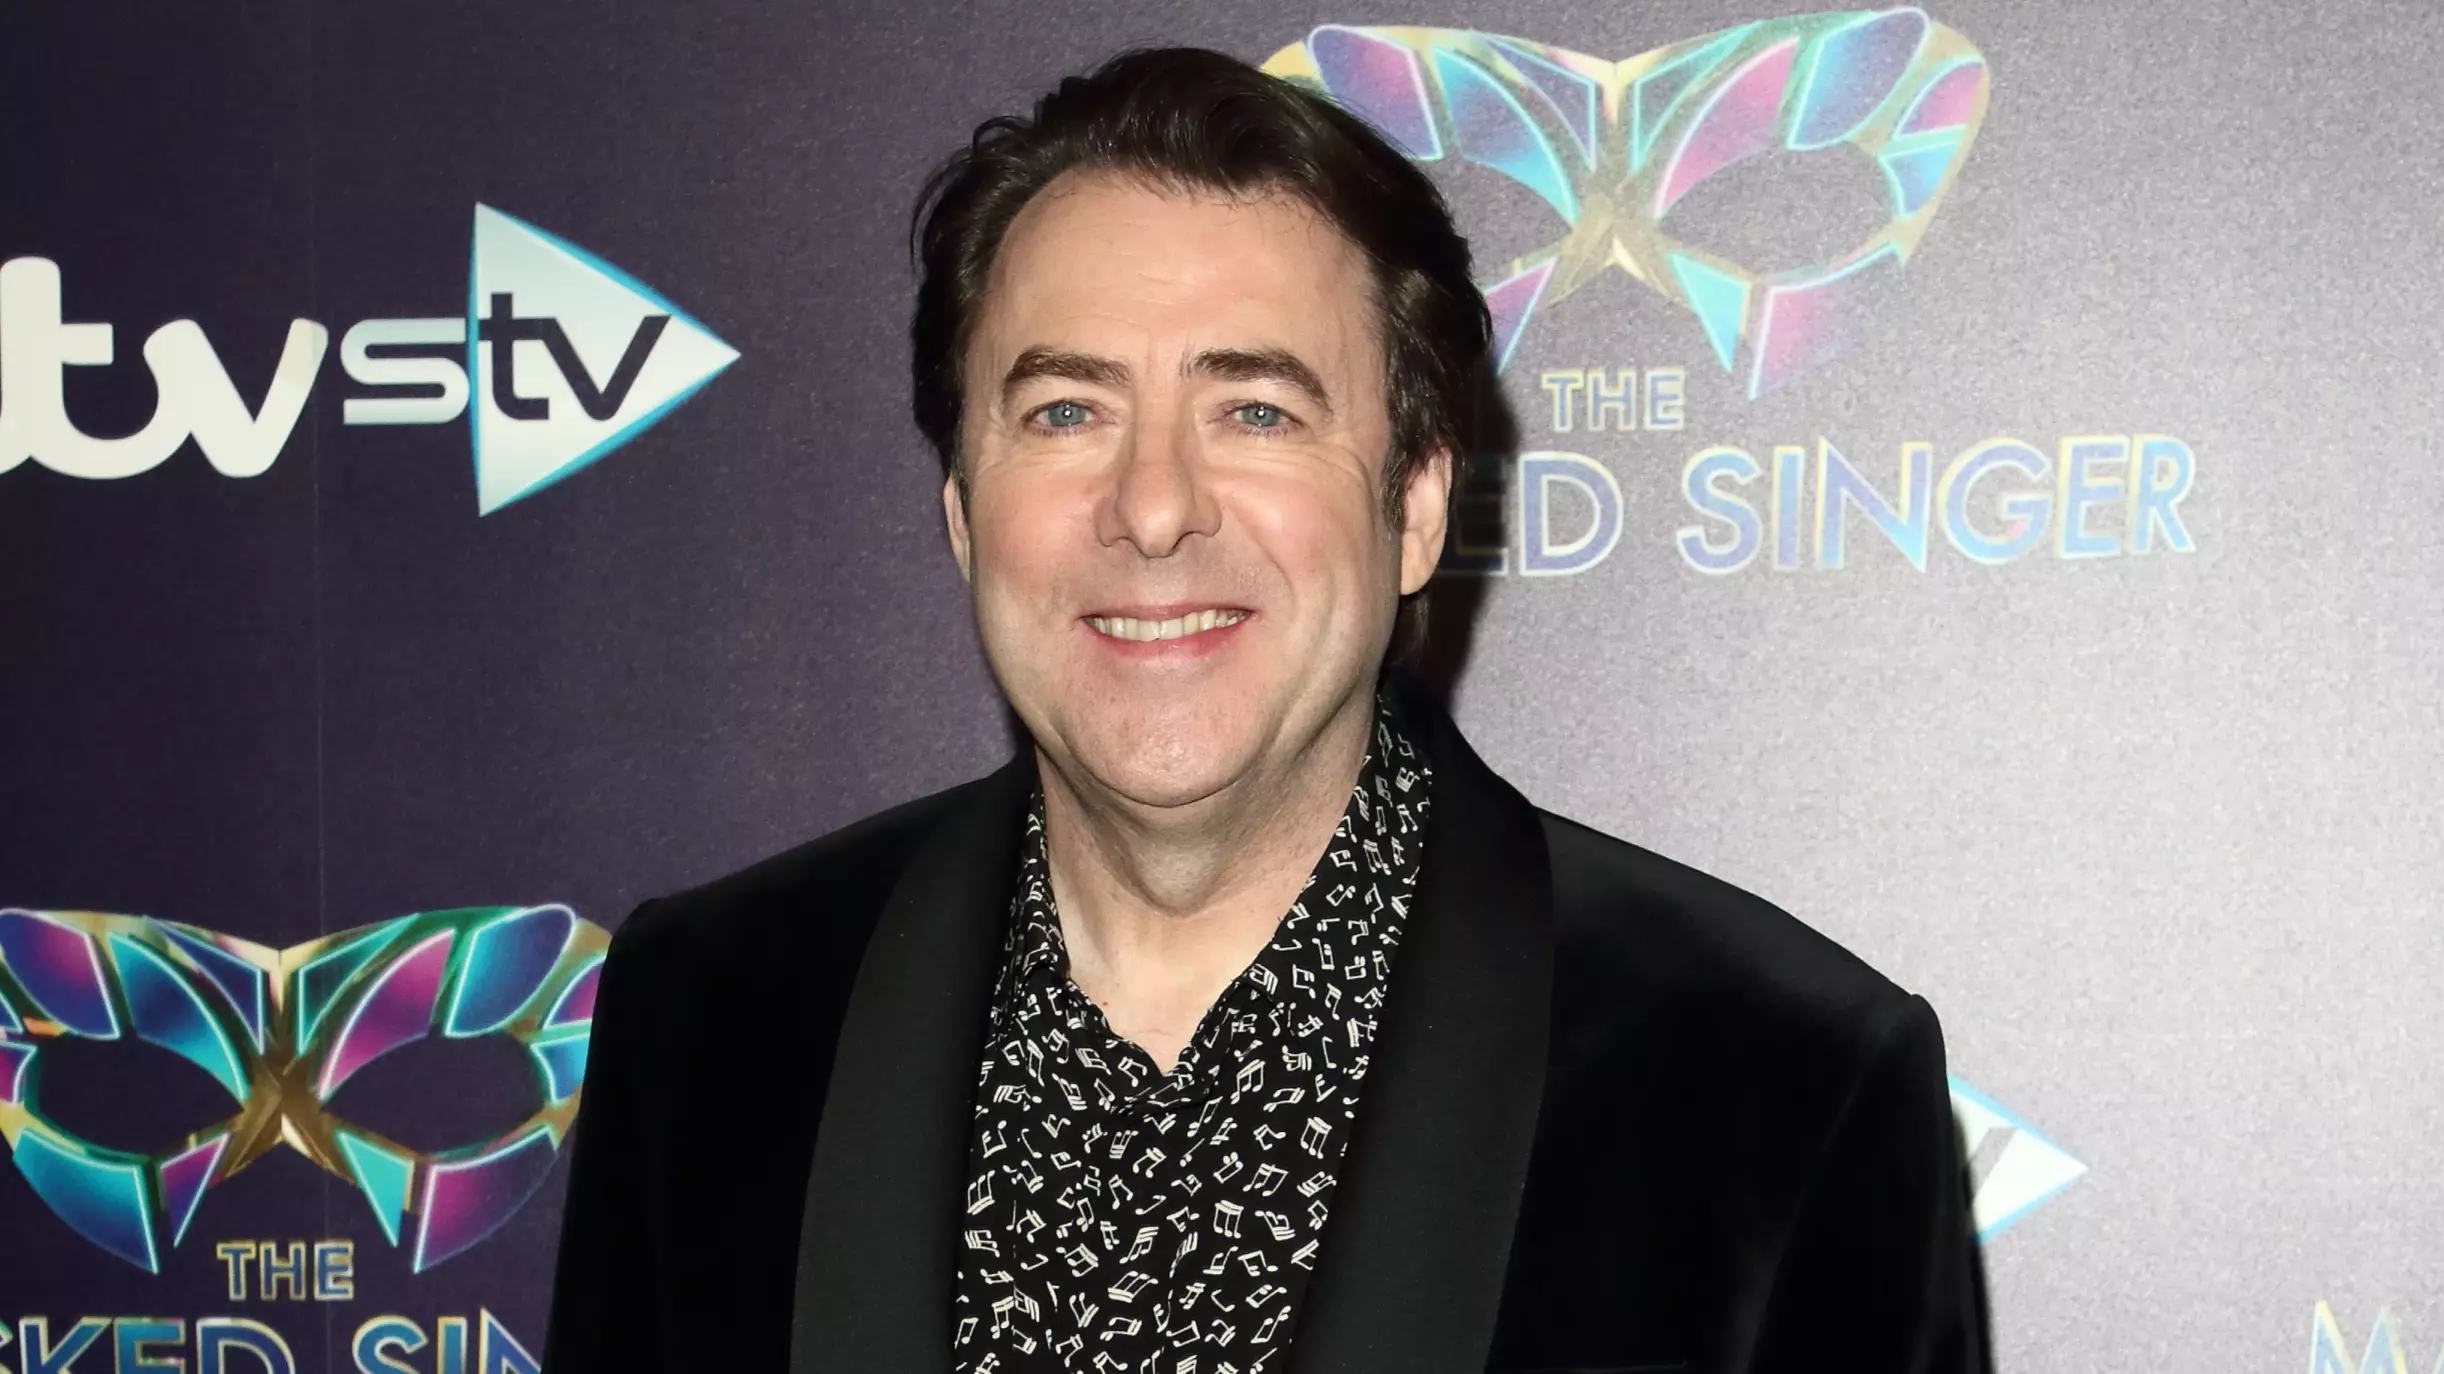 Jonathan Ross' First Sexual Experiences Were With Vacuum Cleaner And Orange